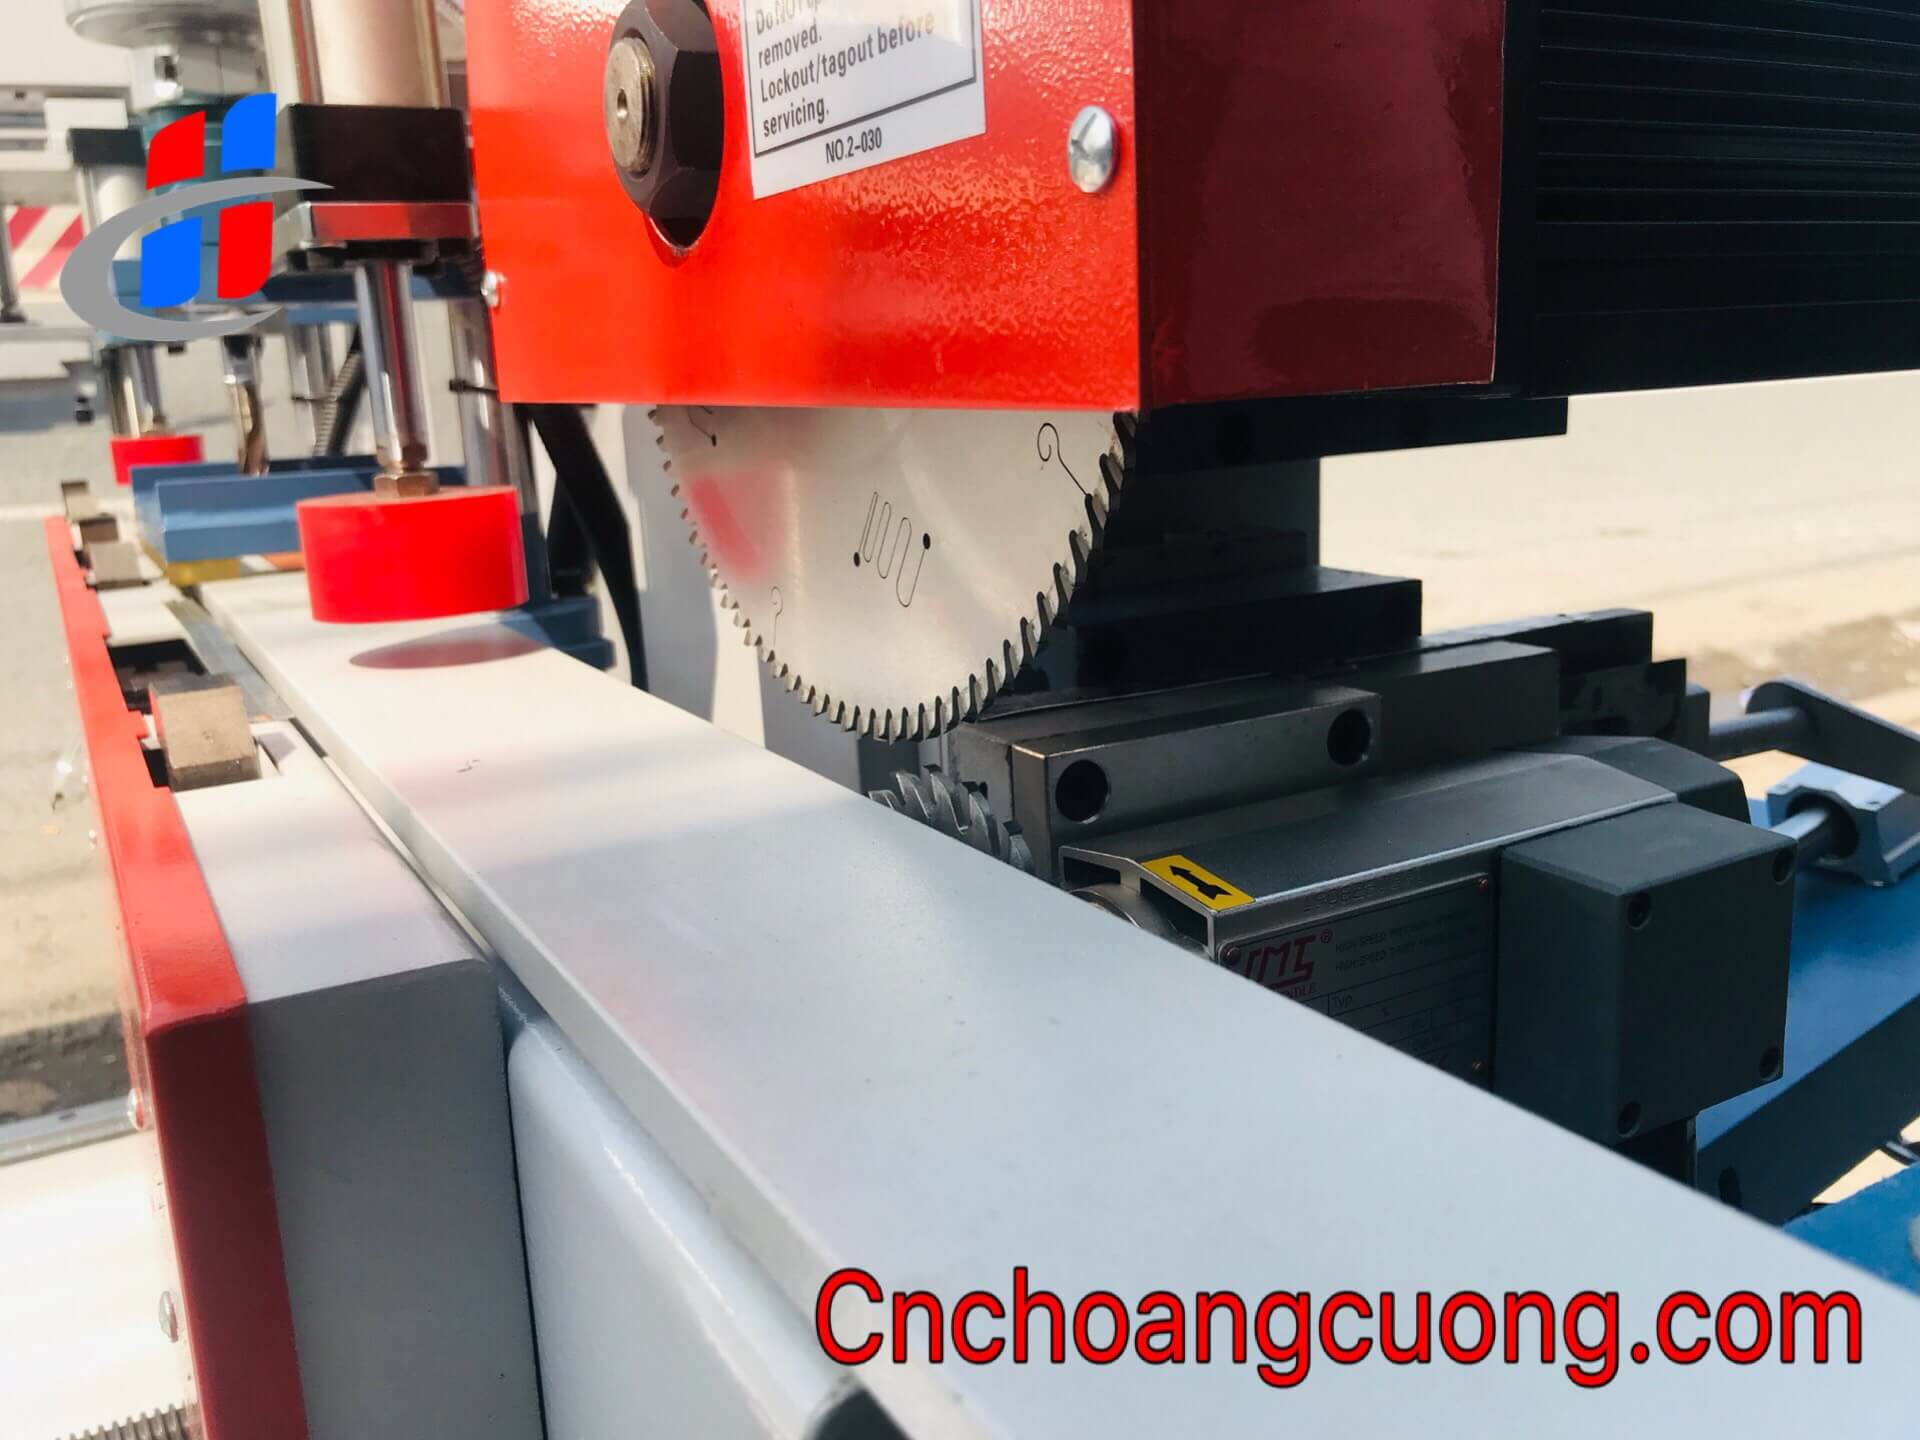 https://cnchoangcuong.com/?post_type=product&p=1105&preview=true